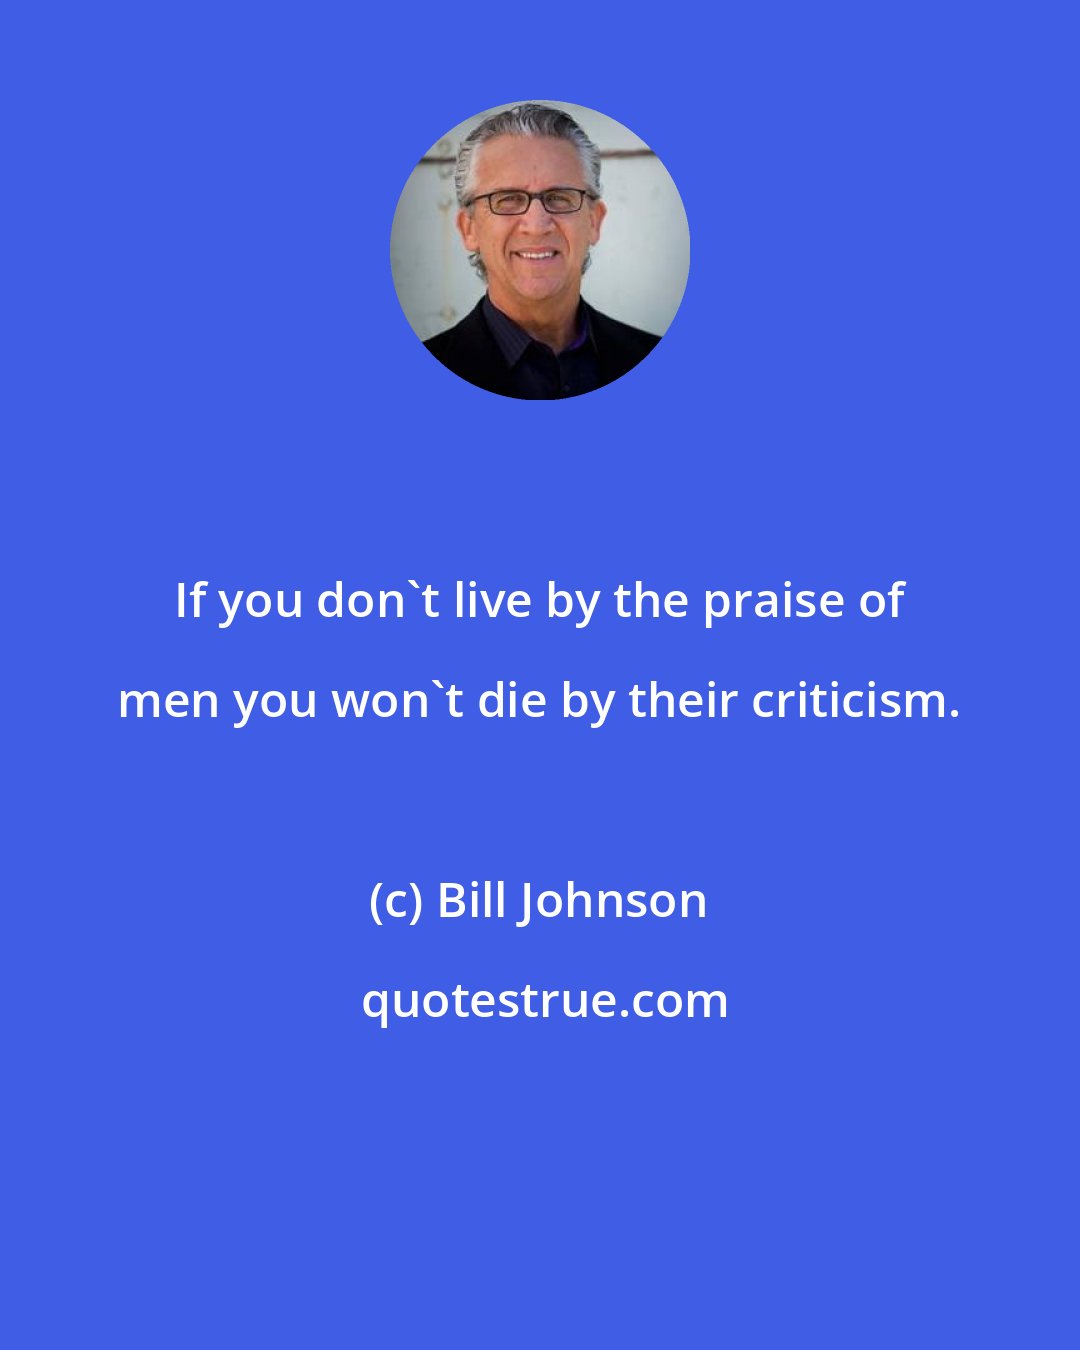 Bill Johnson: If you don't live by the praise of men you won't die by their criticism.